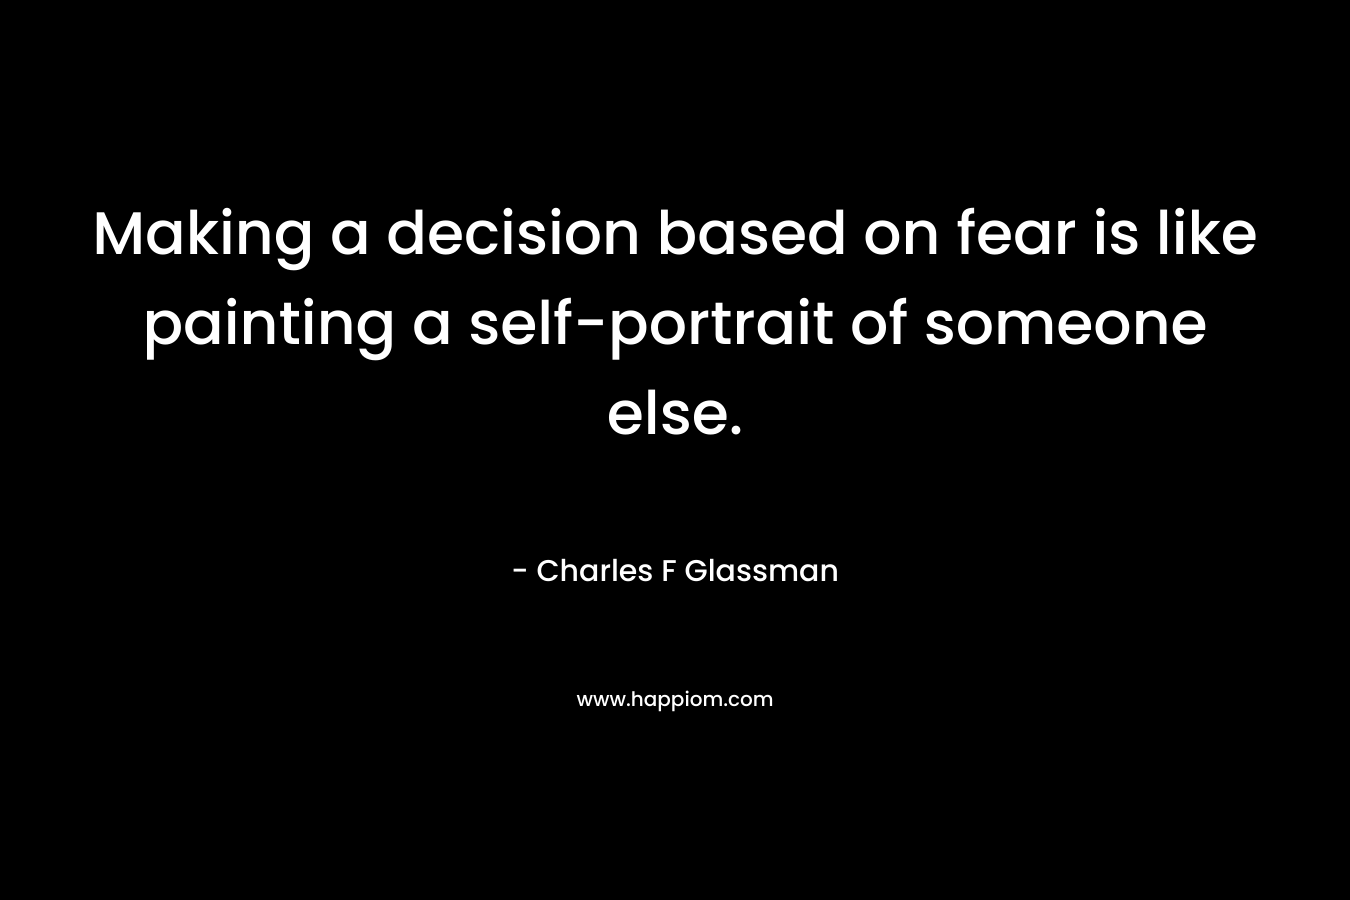 Making a decision based on fear is like painting a self-portrait of someone else.